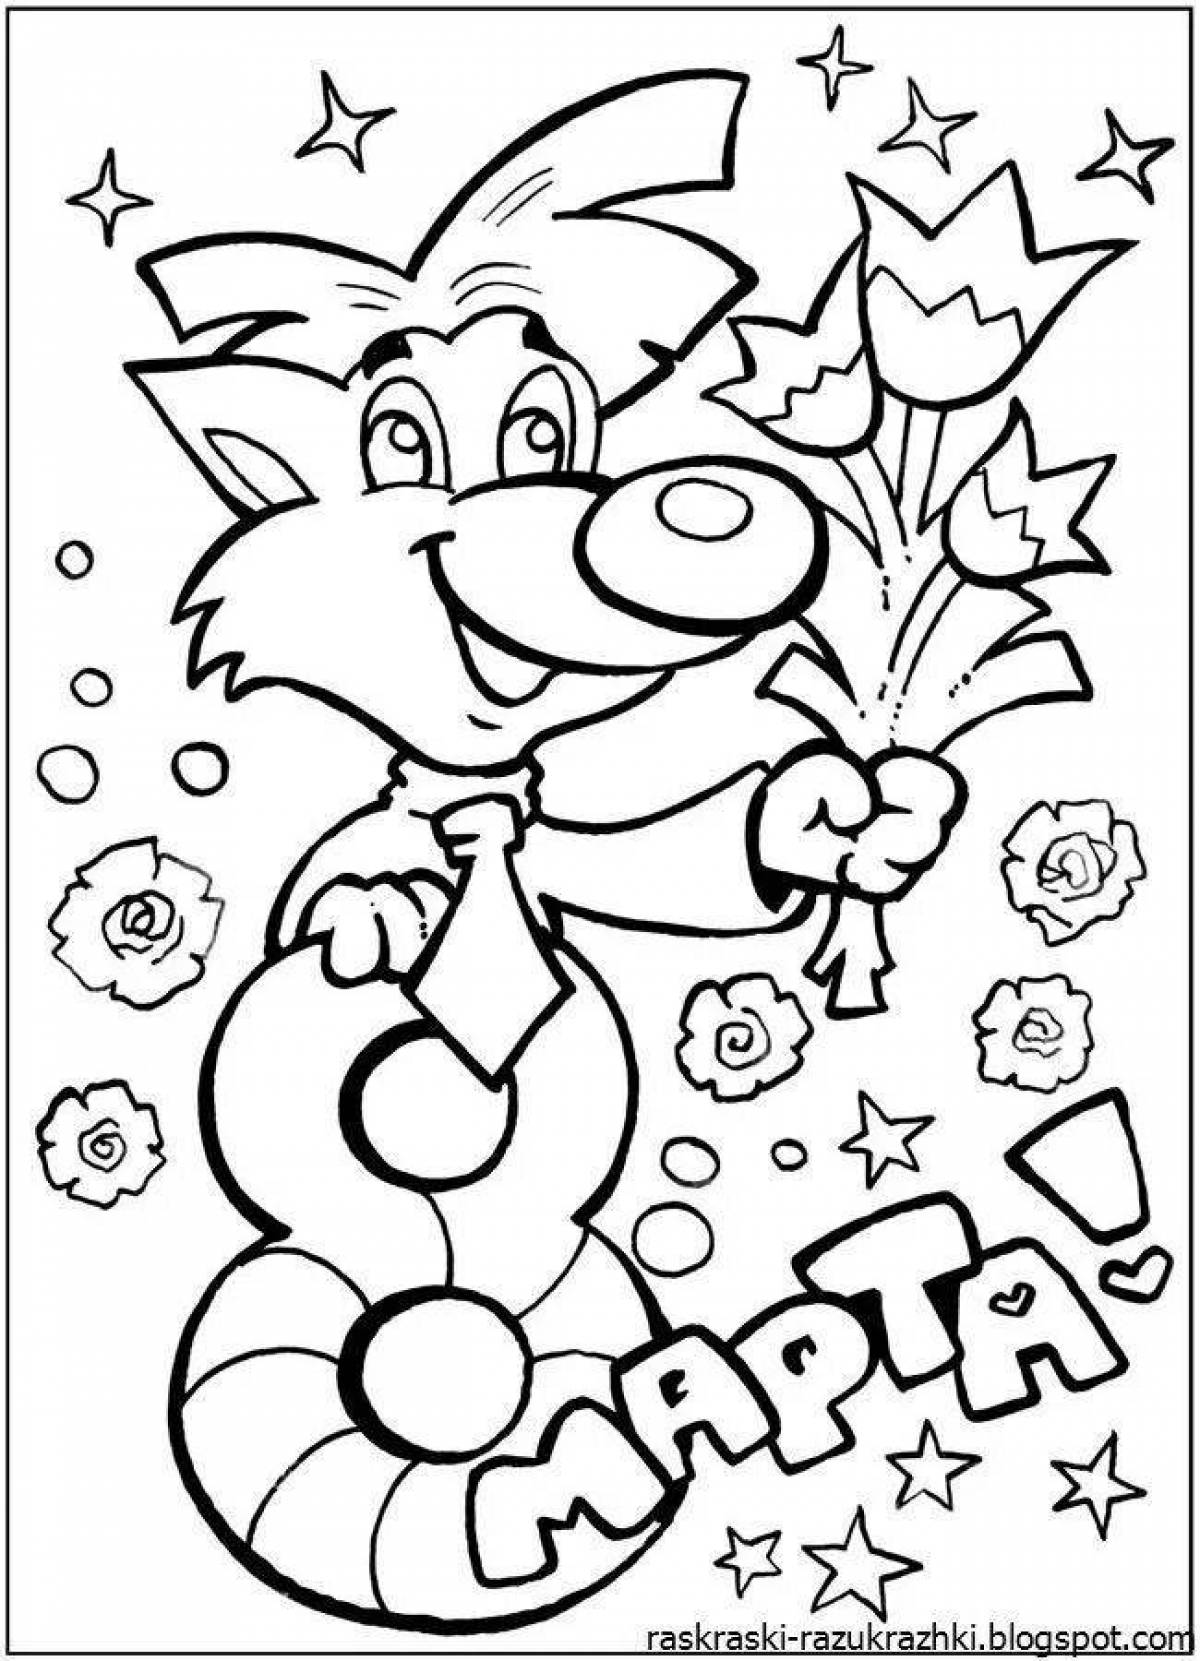 Color frenzy 8 march coloring page